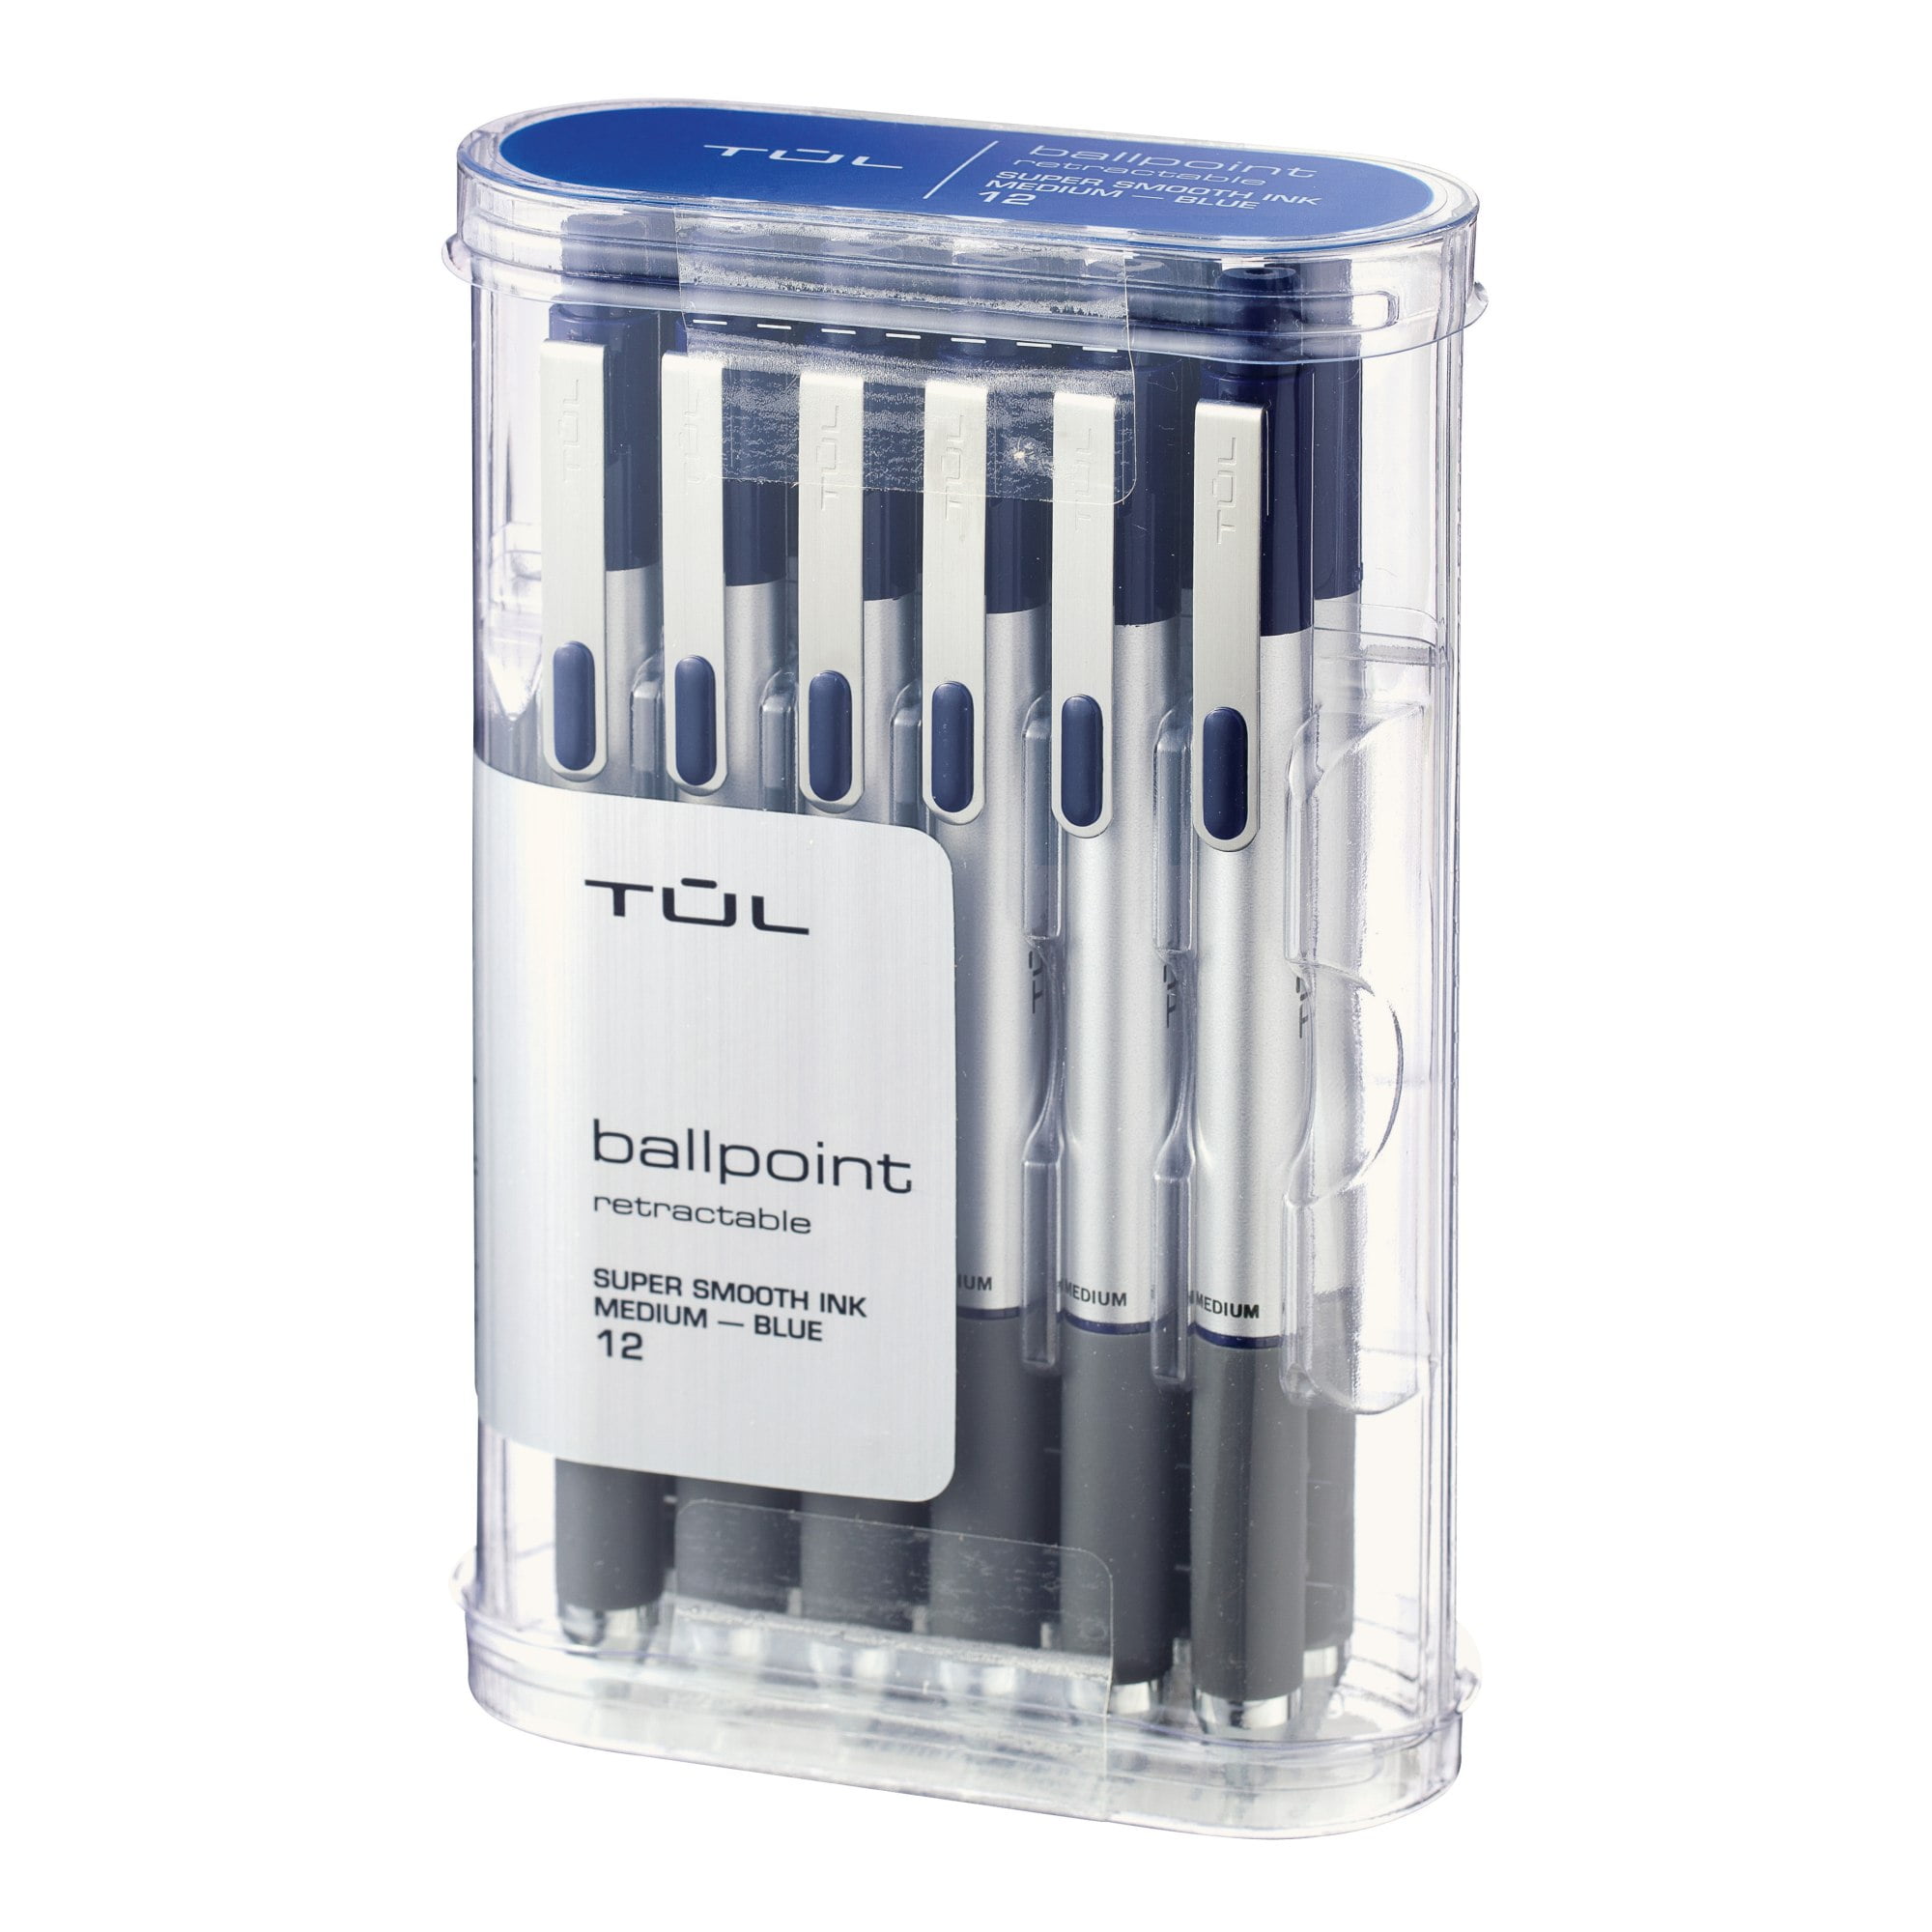 TUL Limited Edition GL Series Metallic Ink Retractable 0.8mm Gel Pens 8 Pack 